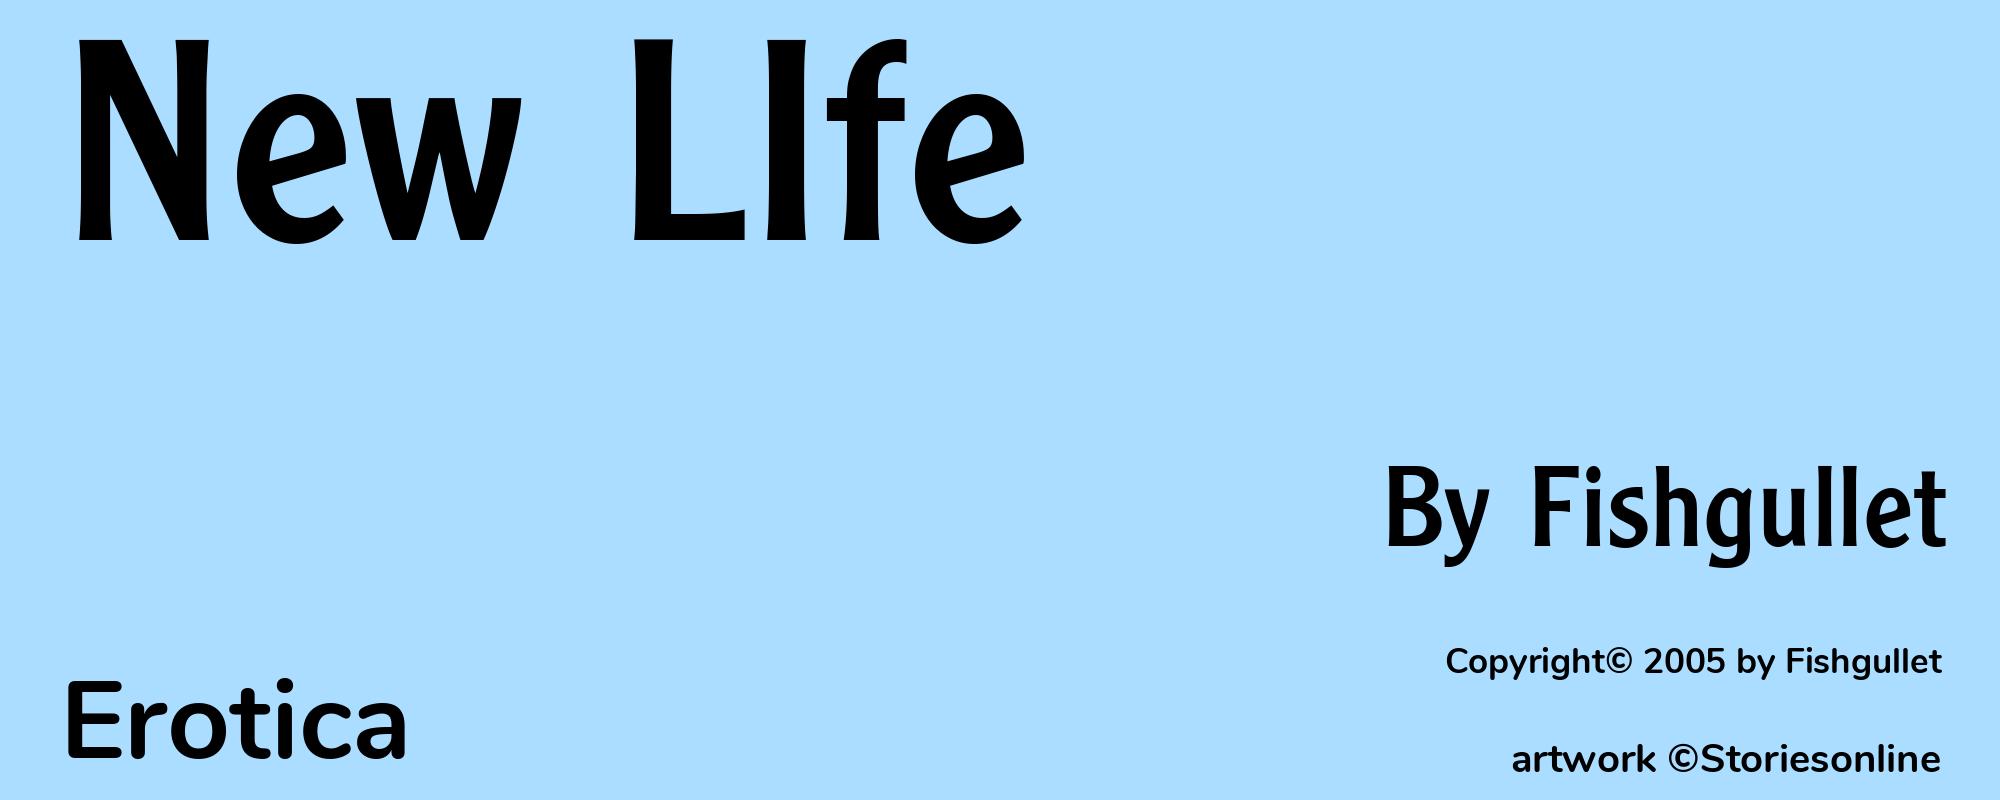 New LIfe - Cover